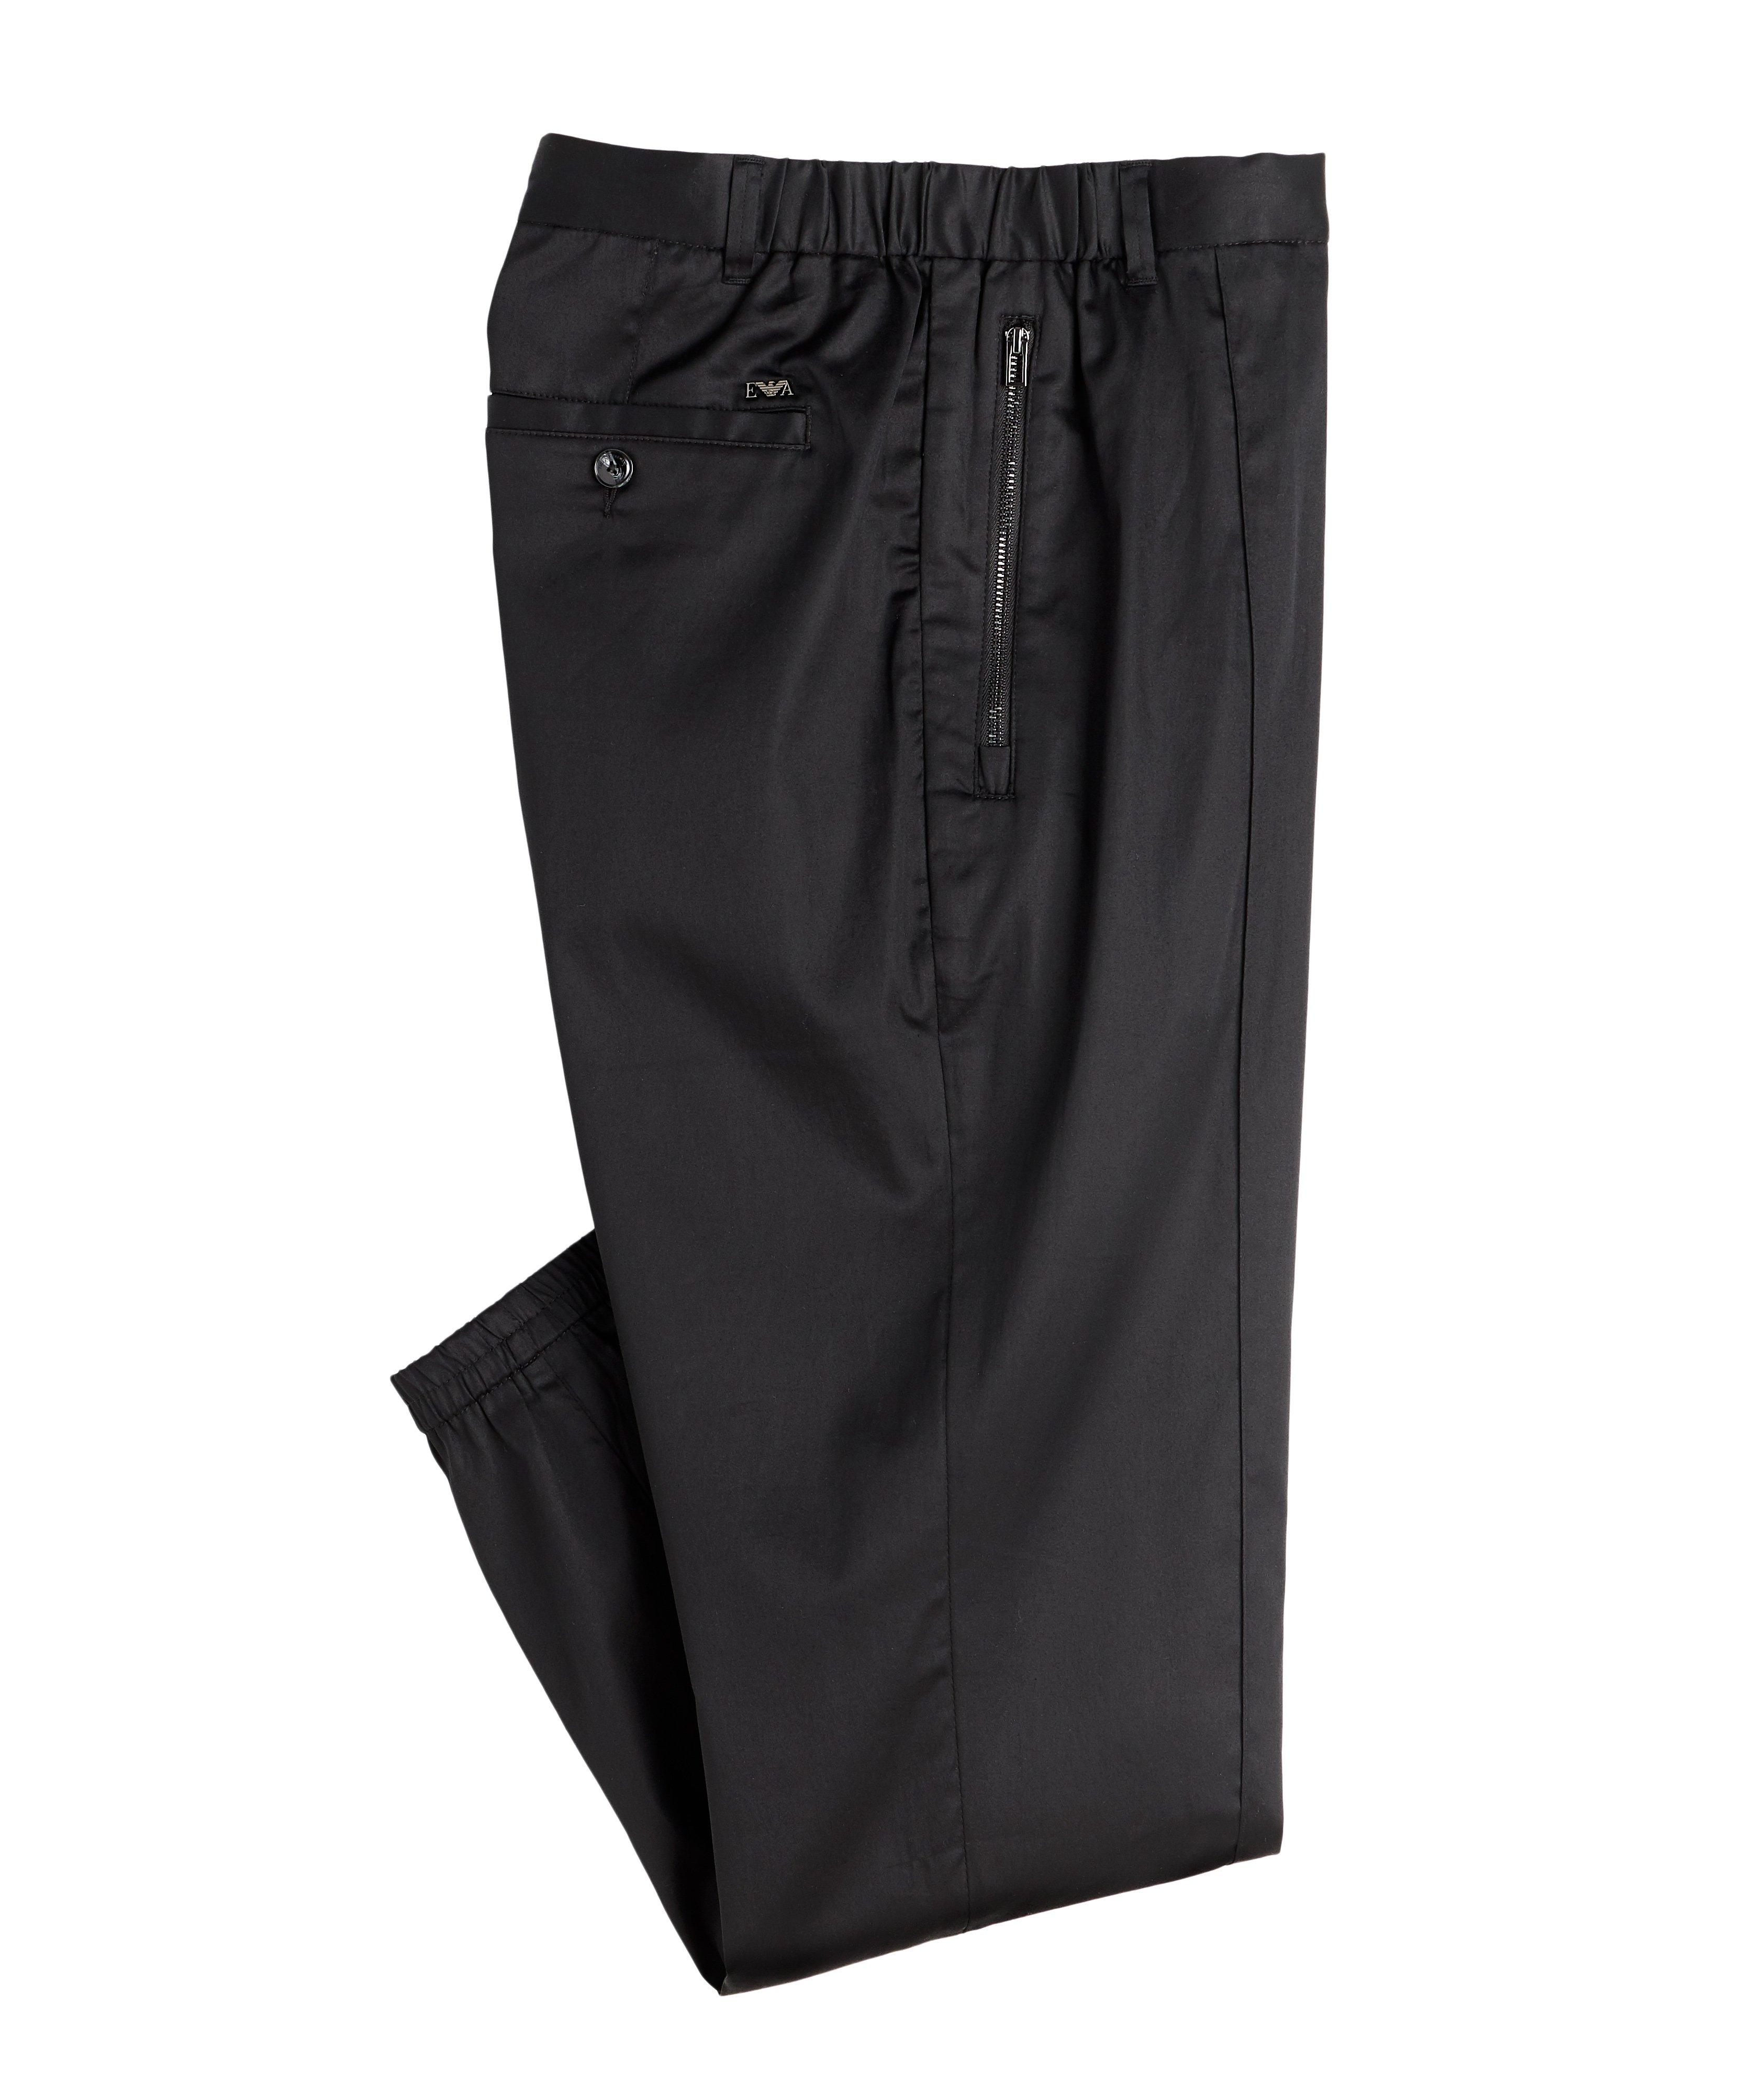 Stretch-Cotton Trousers image 0